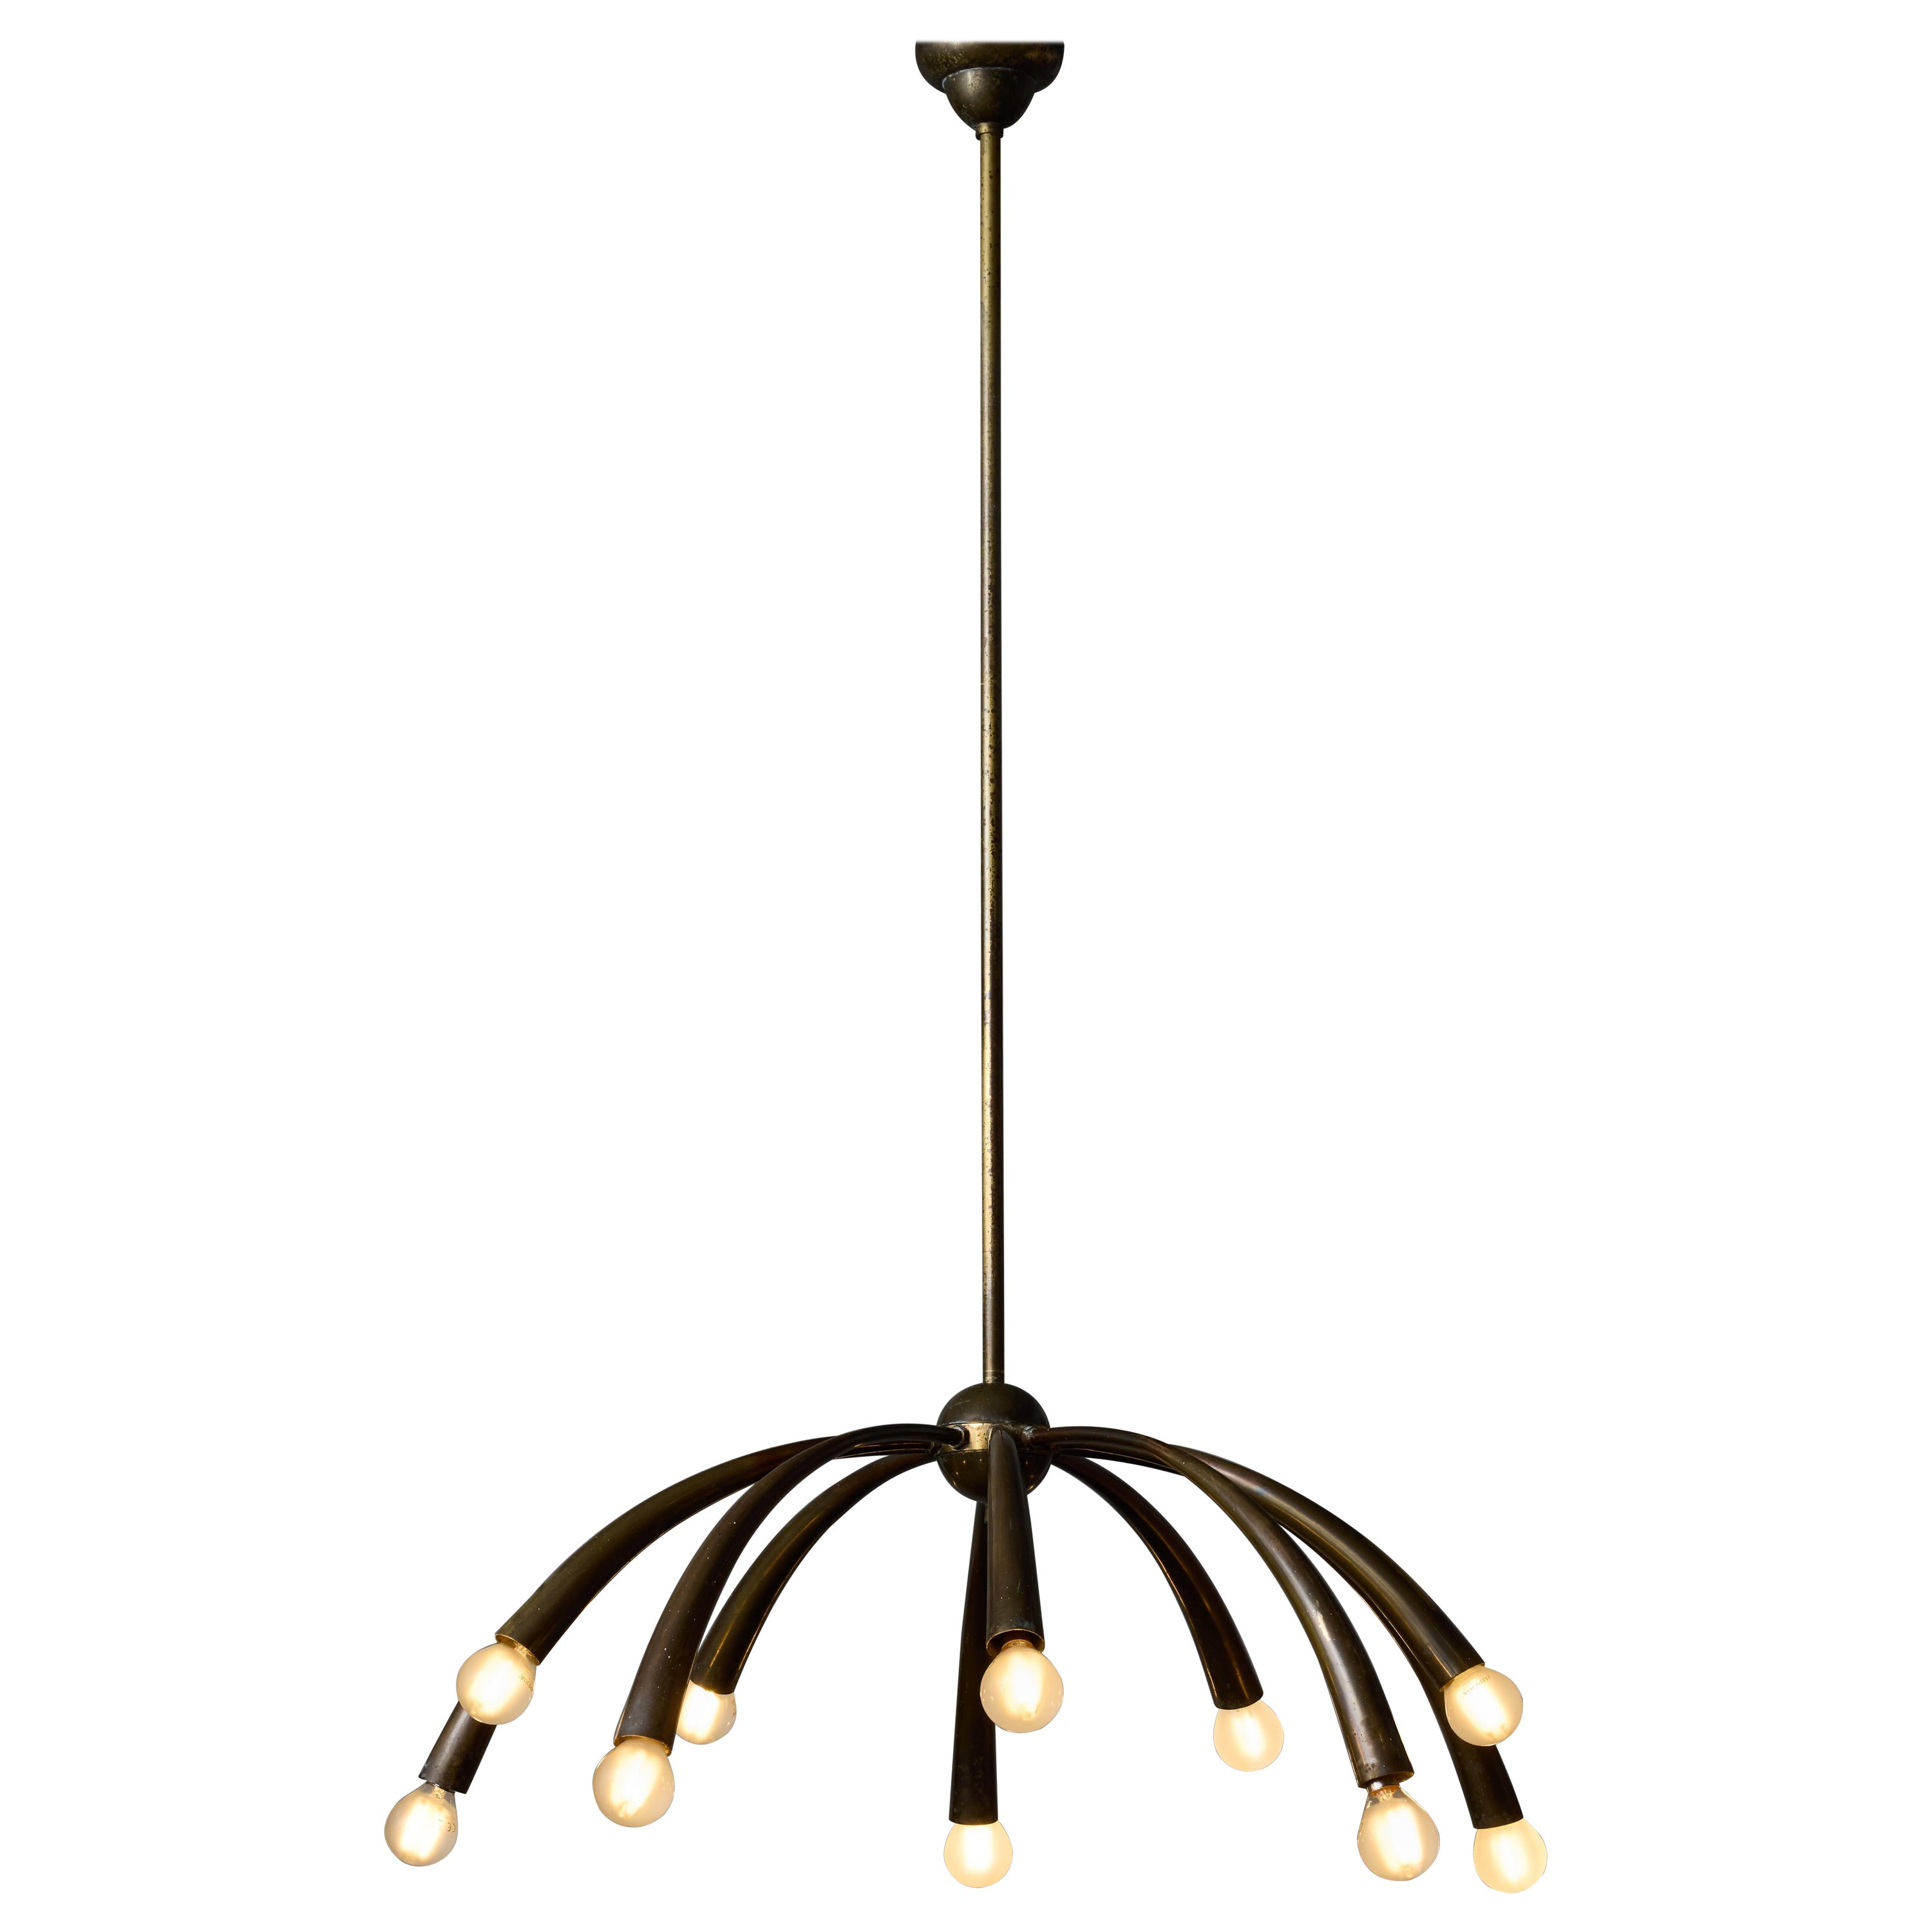 Oscar Torlasco for Lumi Brass Chandelier with Ten Curved Arms of Light For Sale